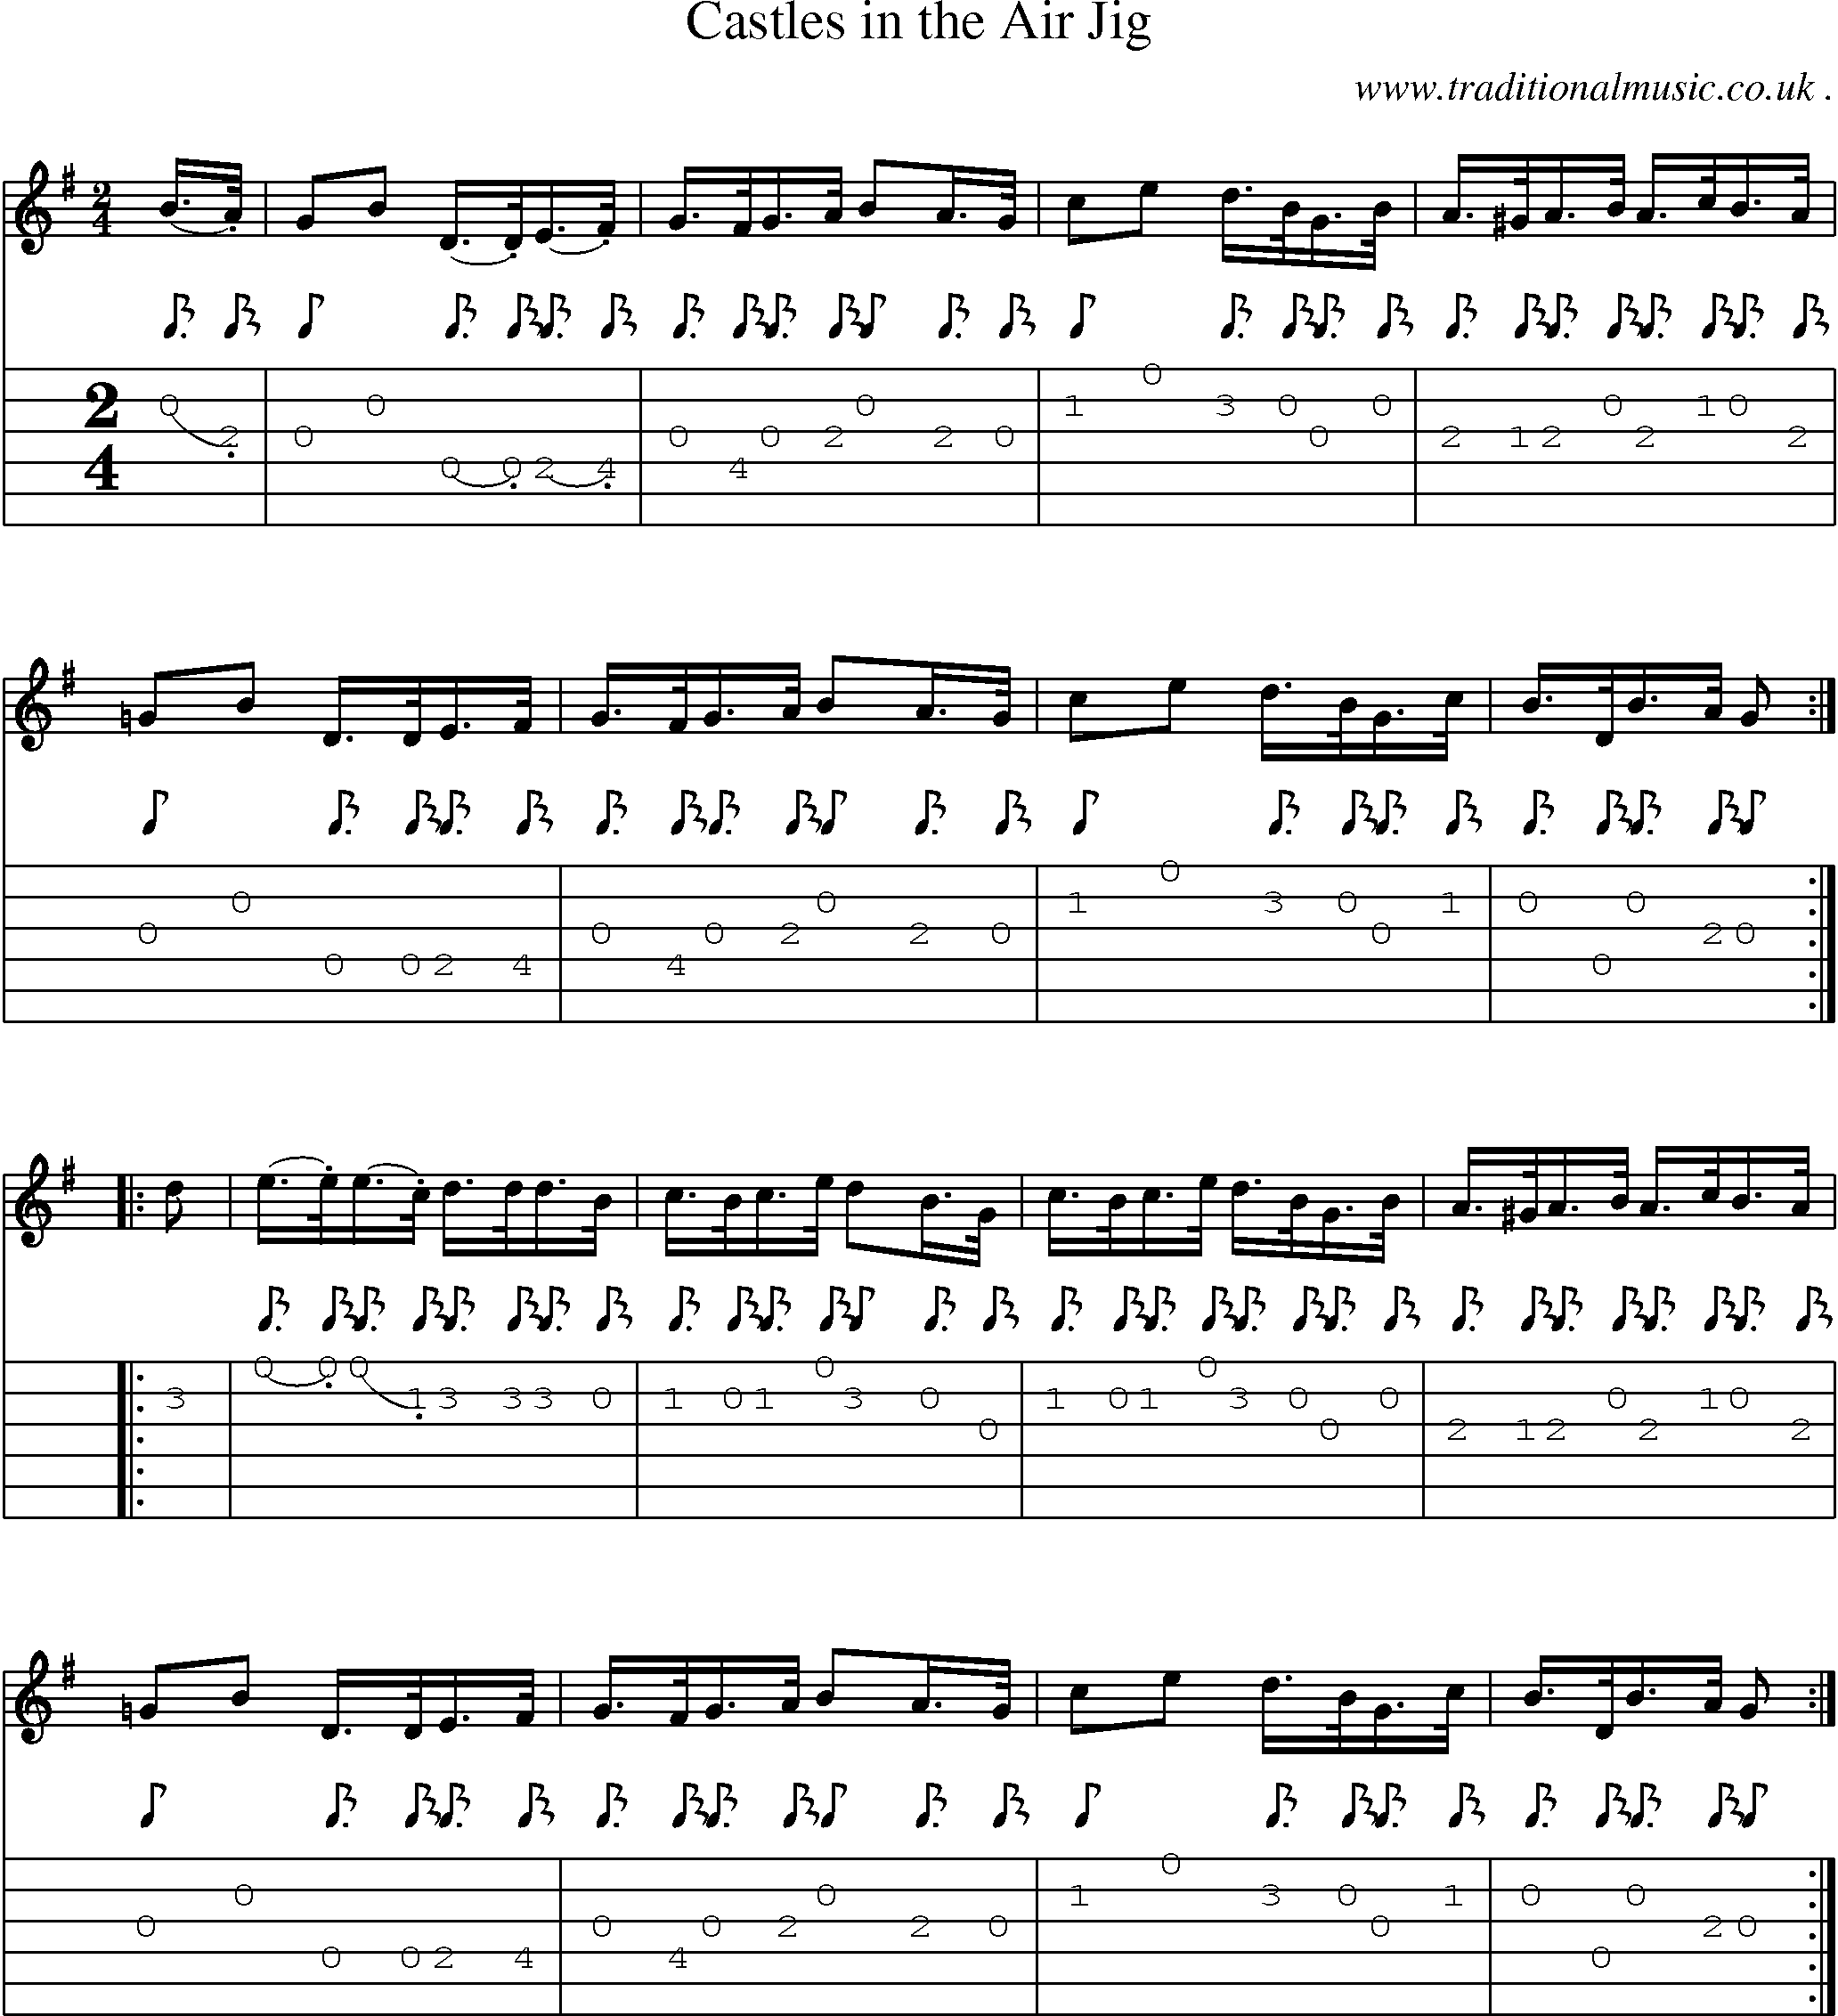 Sheet-Music and Guitar Tabs for Castles In The Air Jig